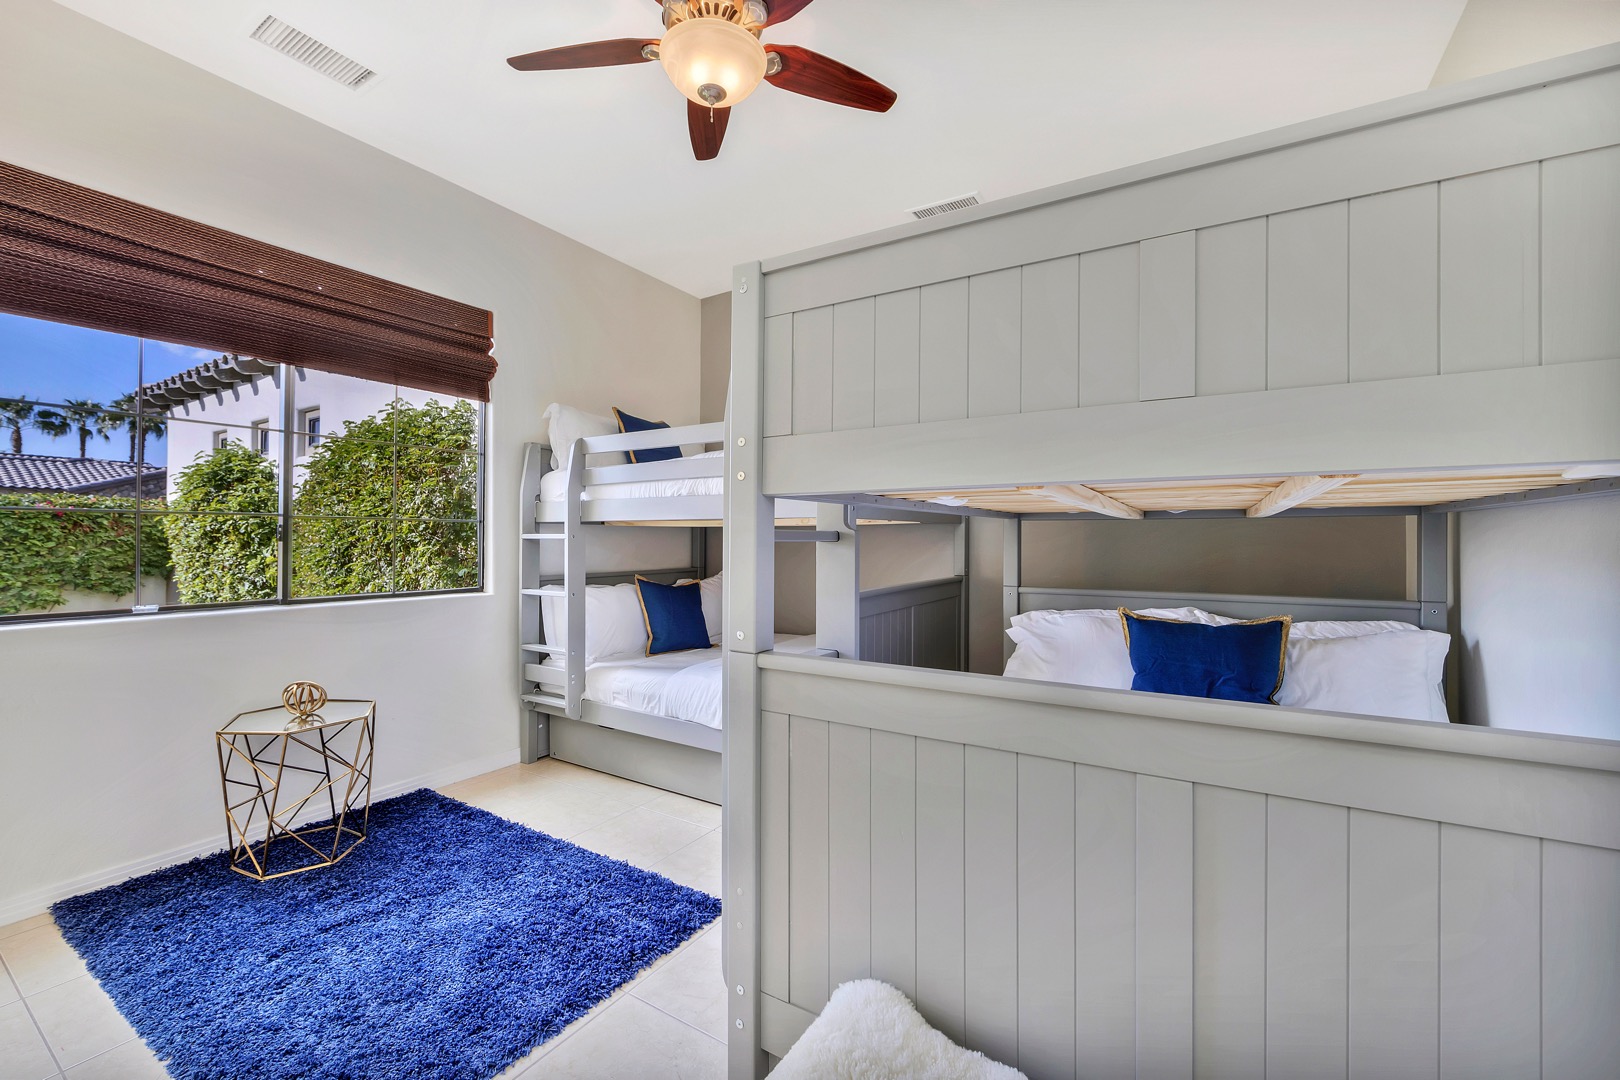 This room sleeps 8 comfortably on the TWO FULL size bunk beds
Bedroom 5